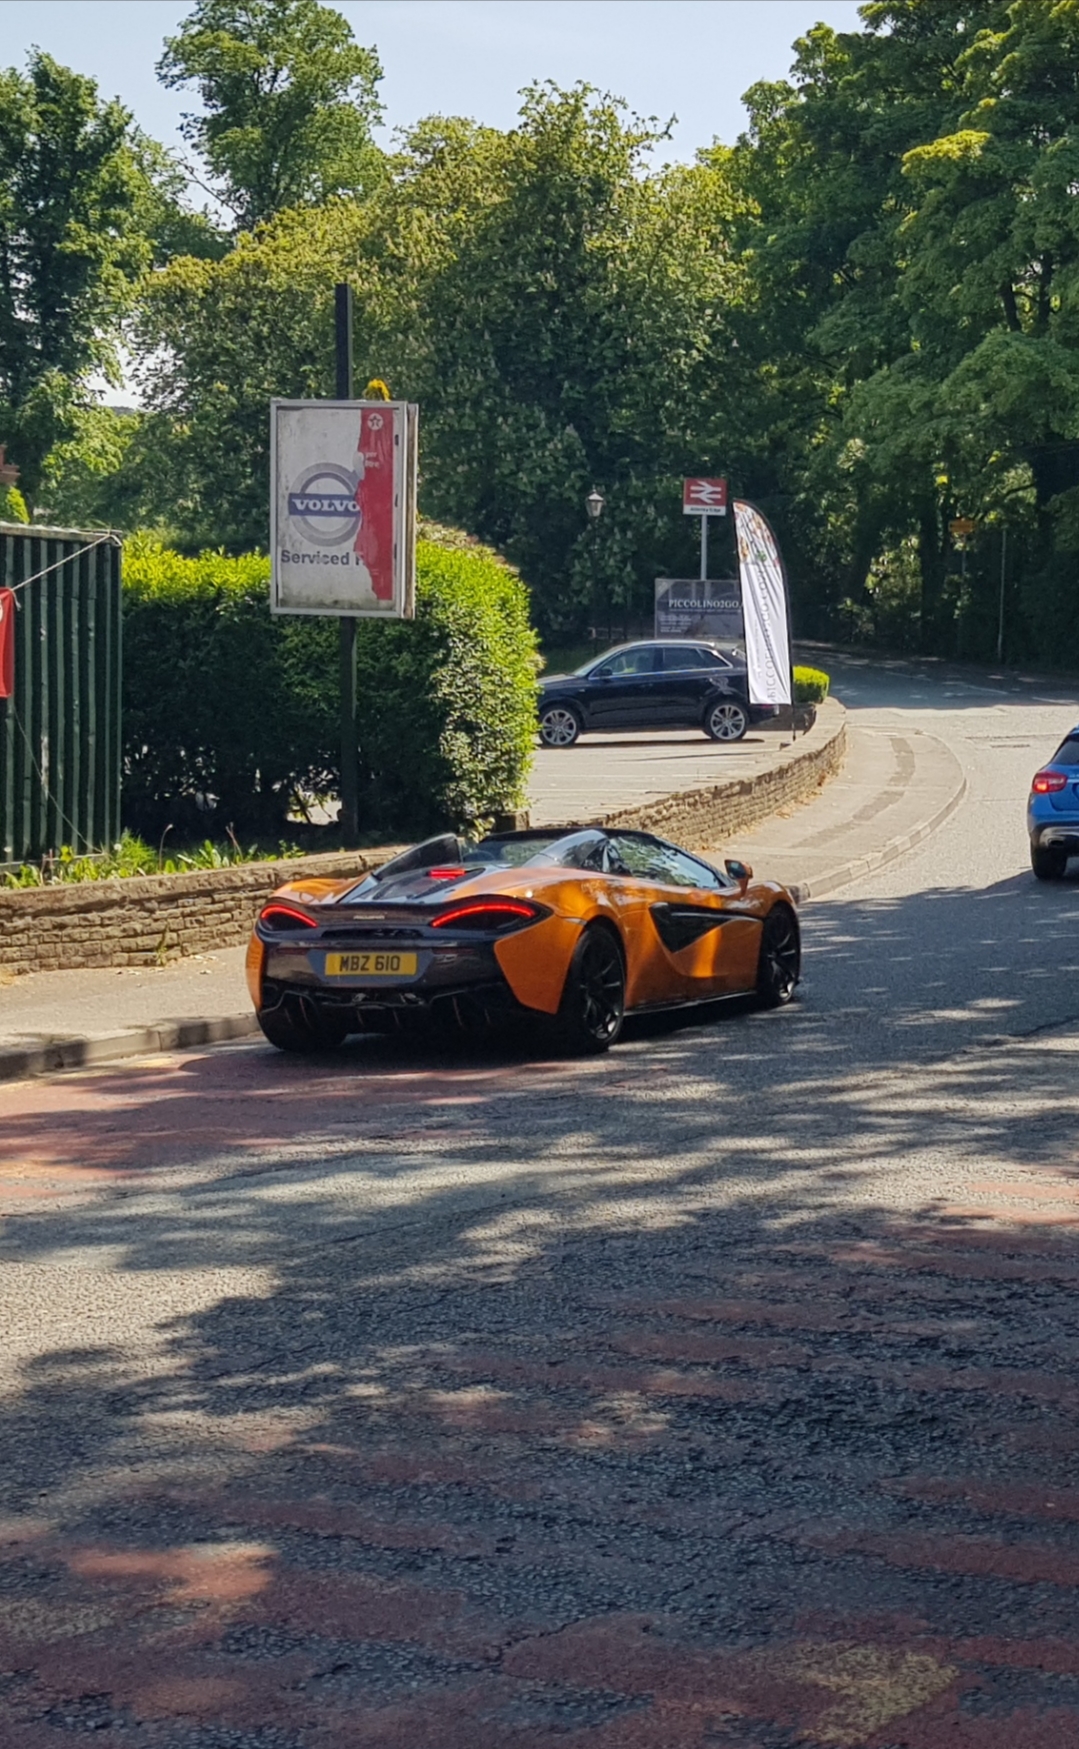 Supercars spotted, some rarities (vol 7) - Page 285 - General Gassing - PistonHeads